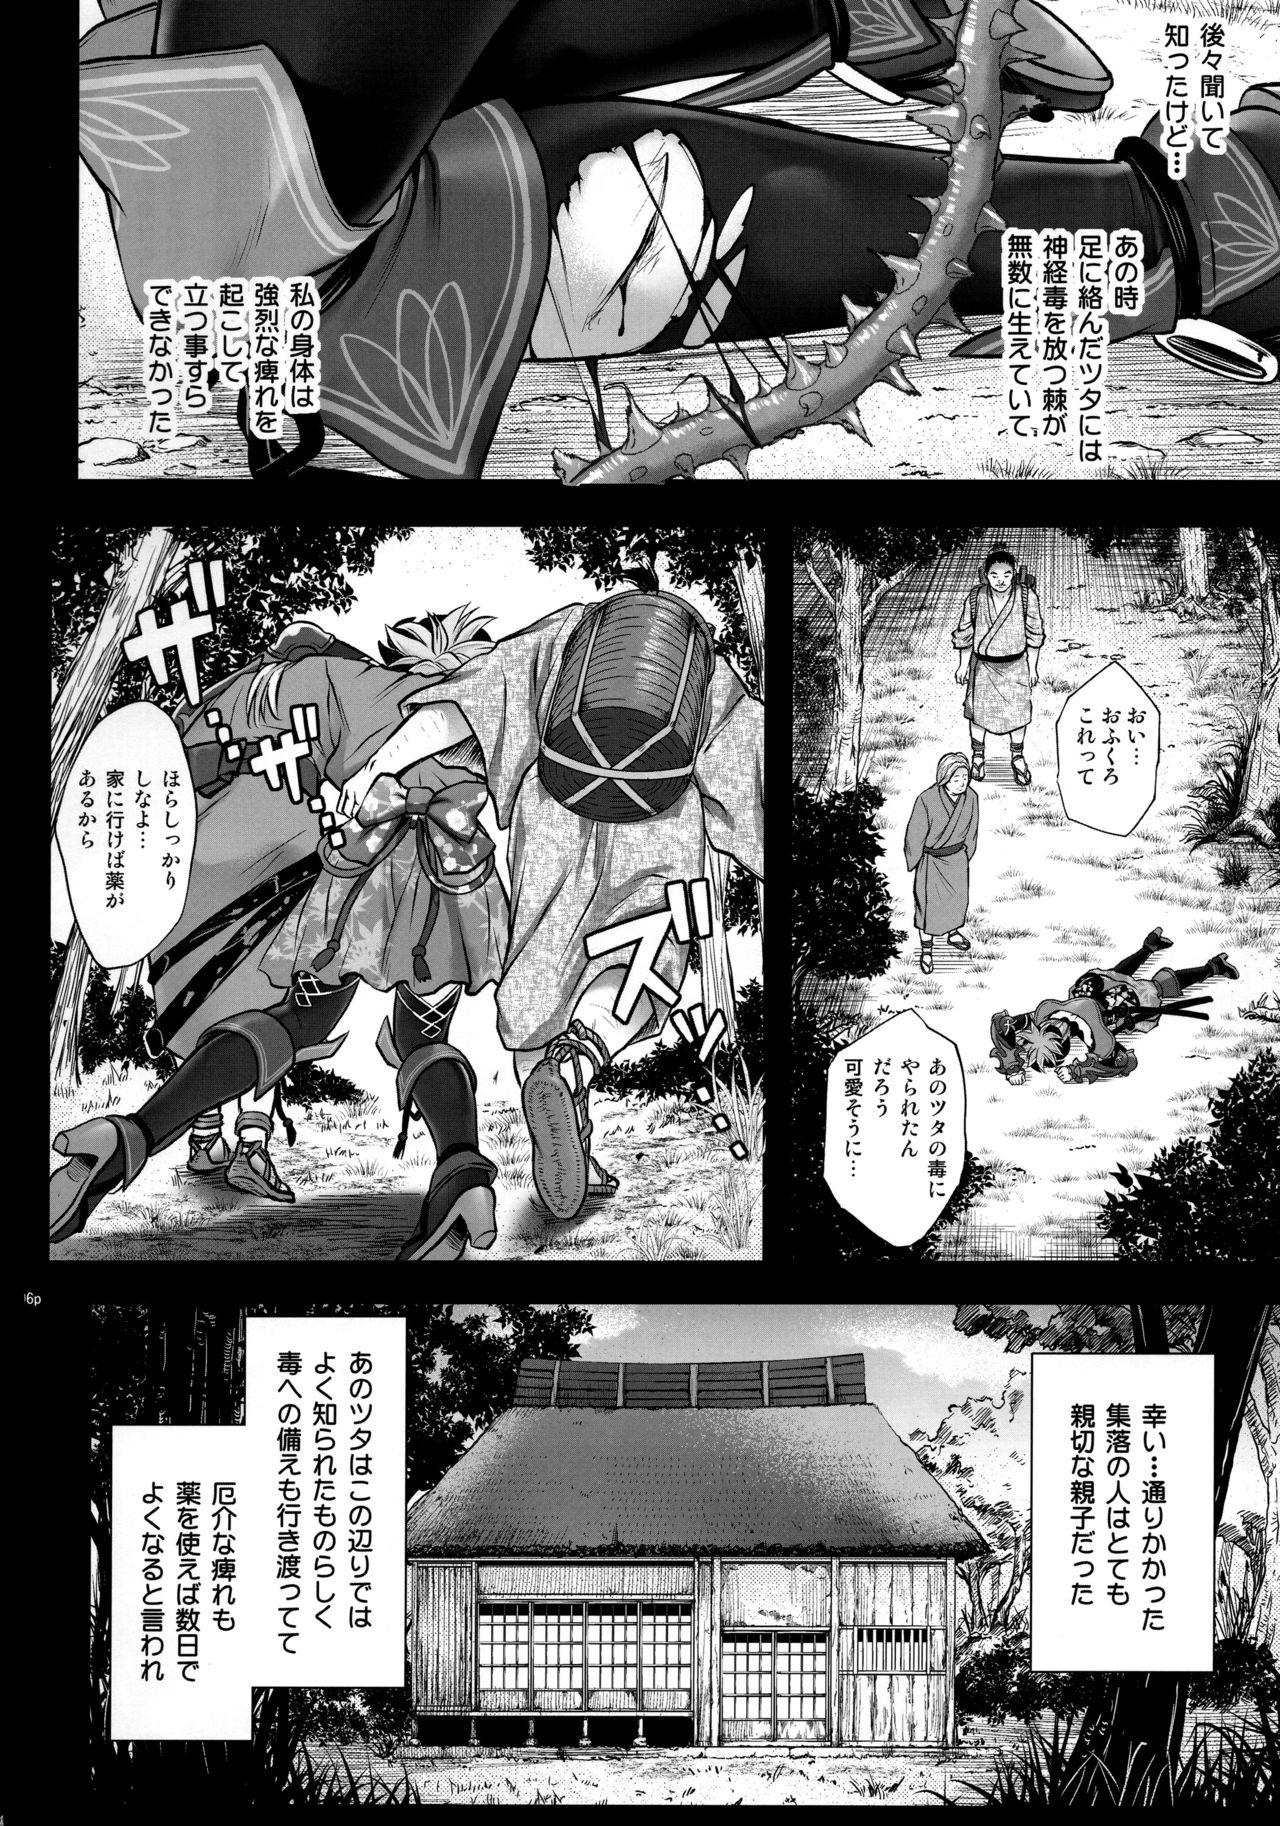 Dykes T-32 hooollow - Fate grand order Black Dick - Page 6